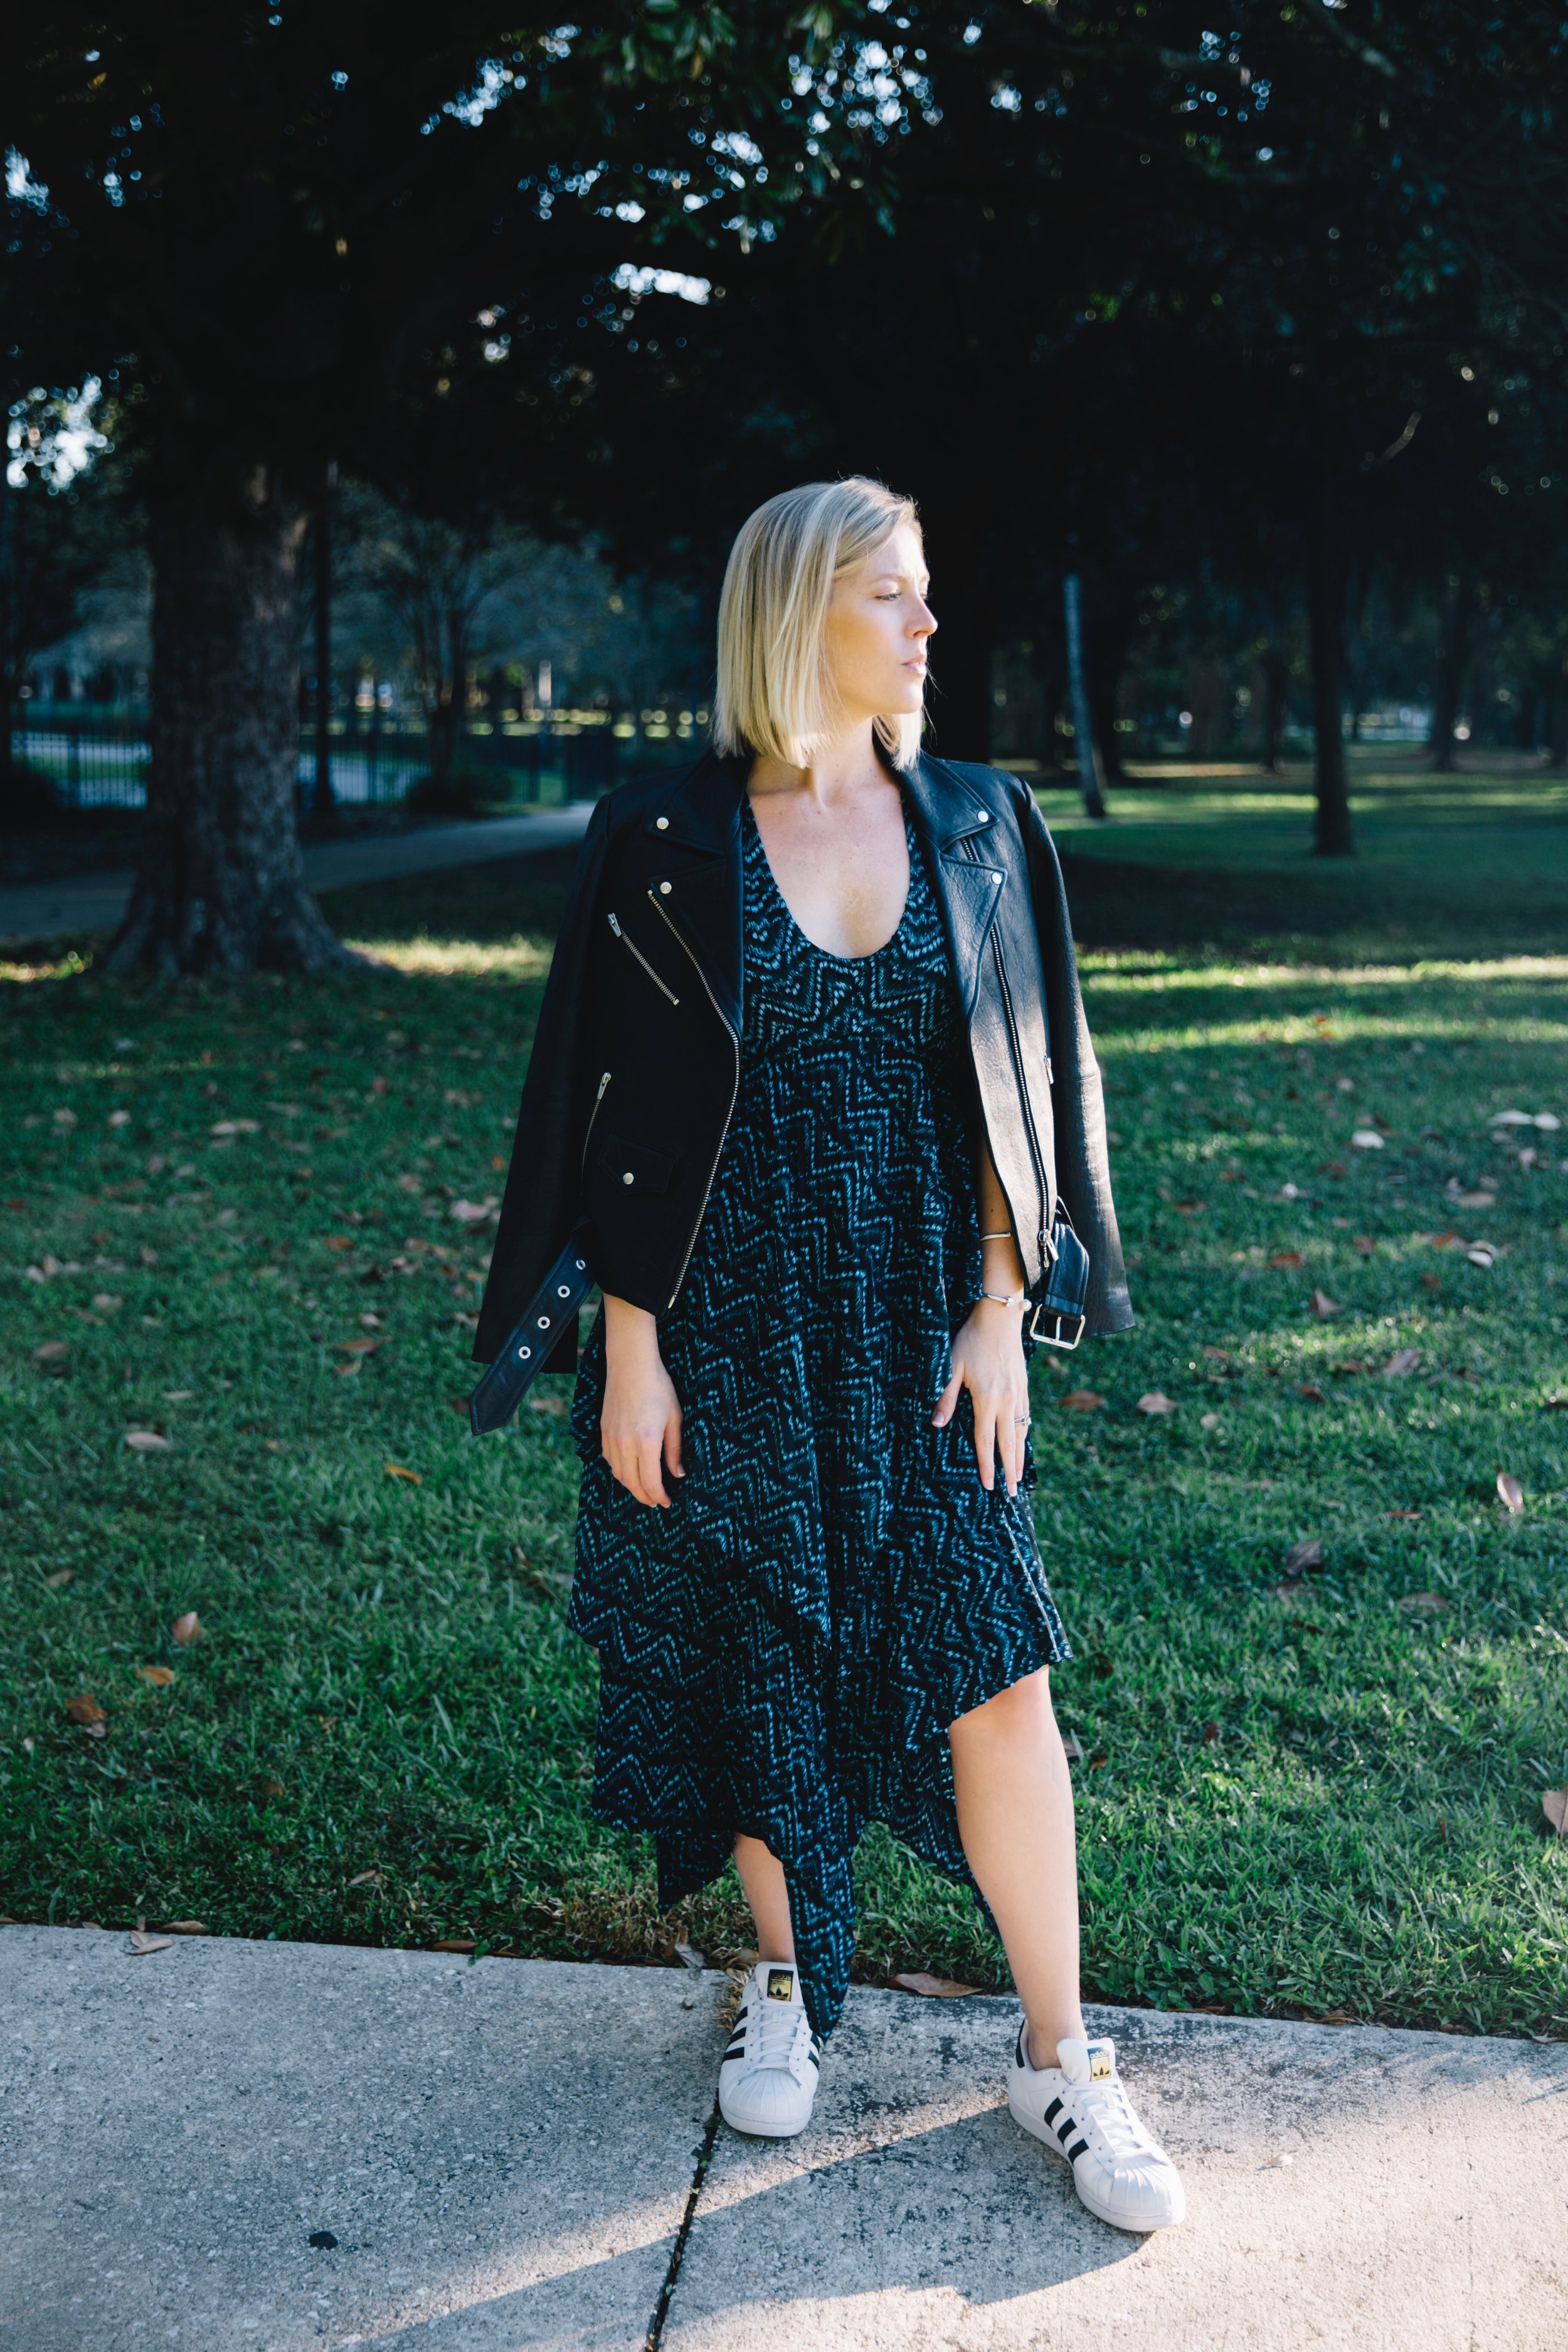 ALC Dress and Veda Jacket for Spring Style | What to Wear in Cold Spring Weather featured by top US fashion blog, The Borrowed Babes